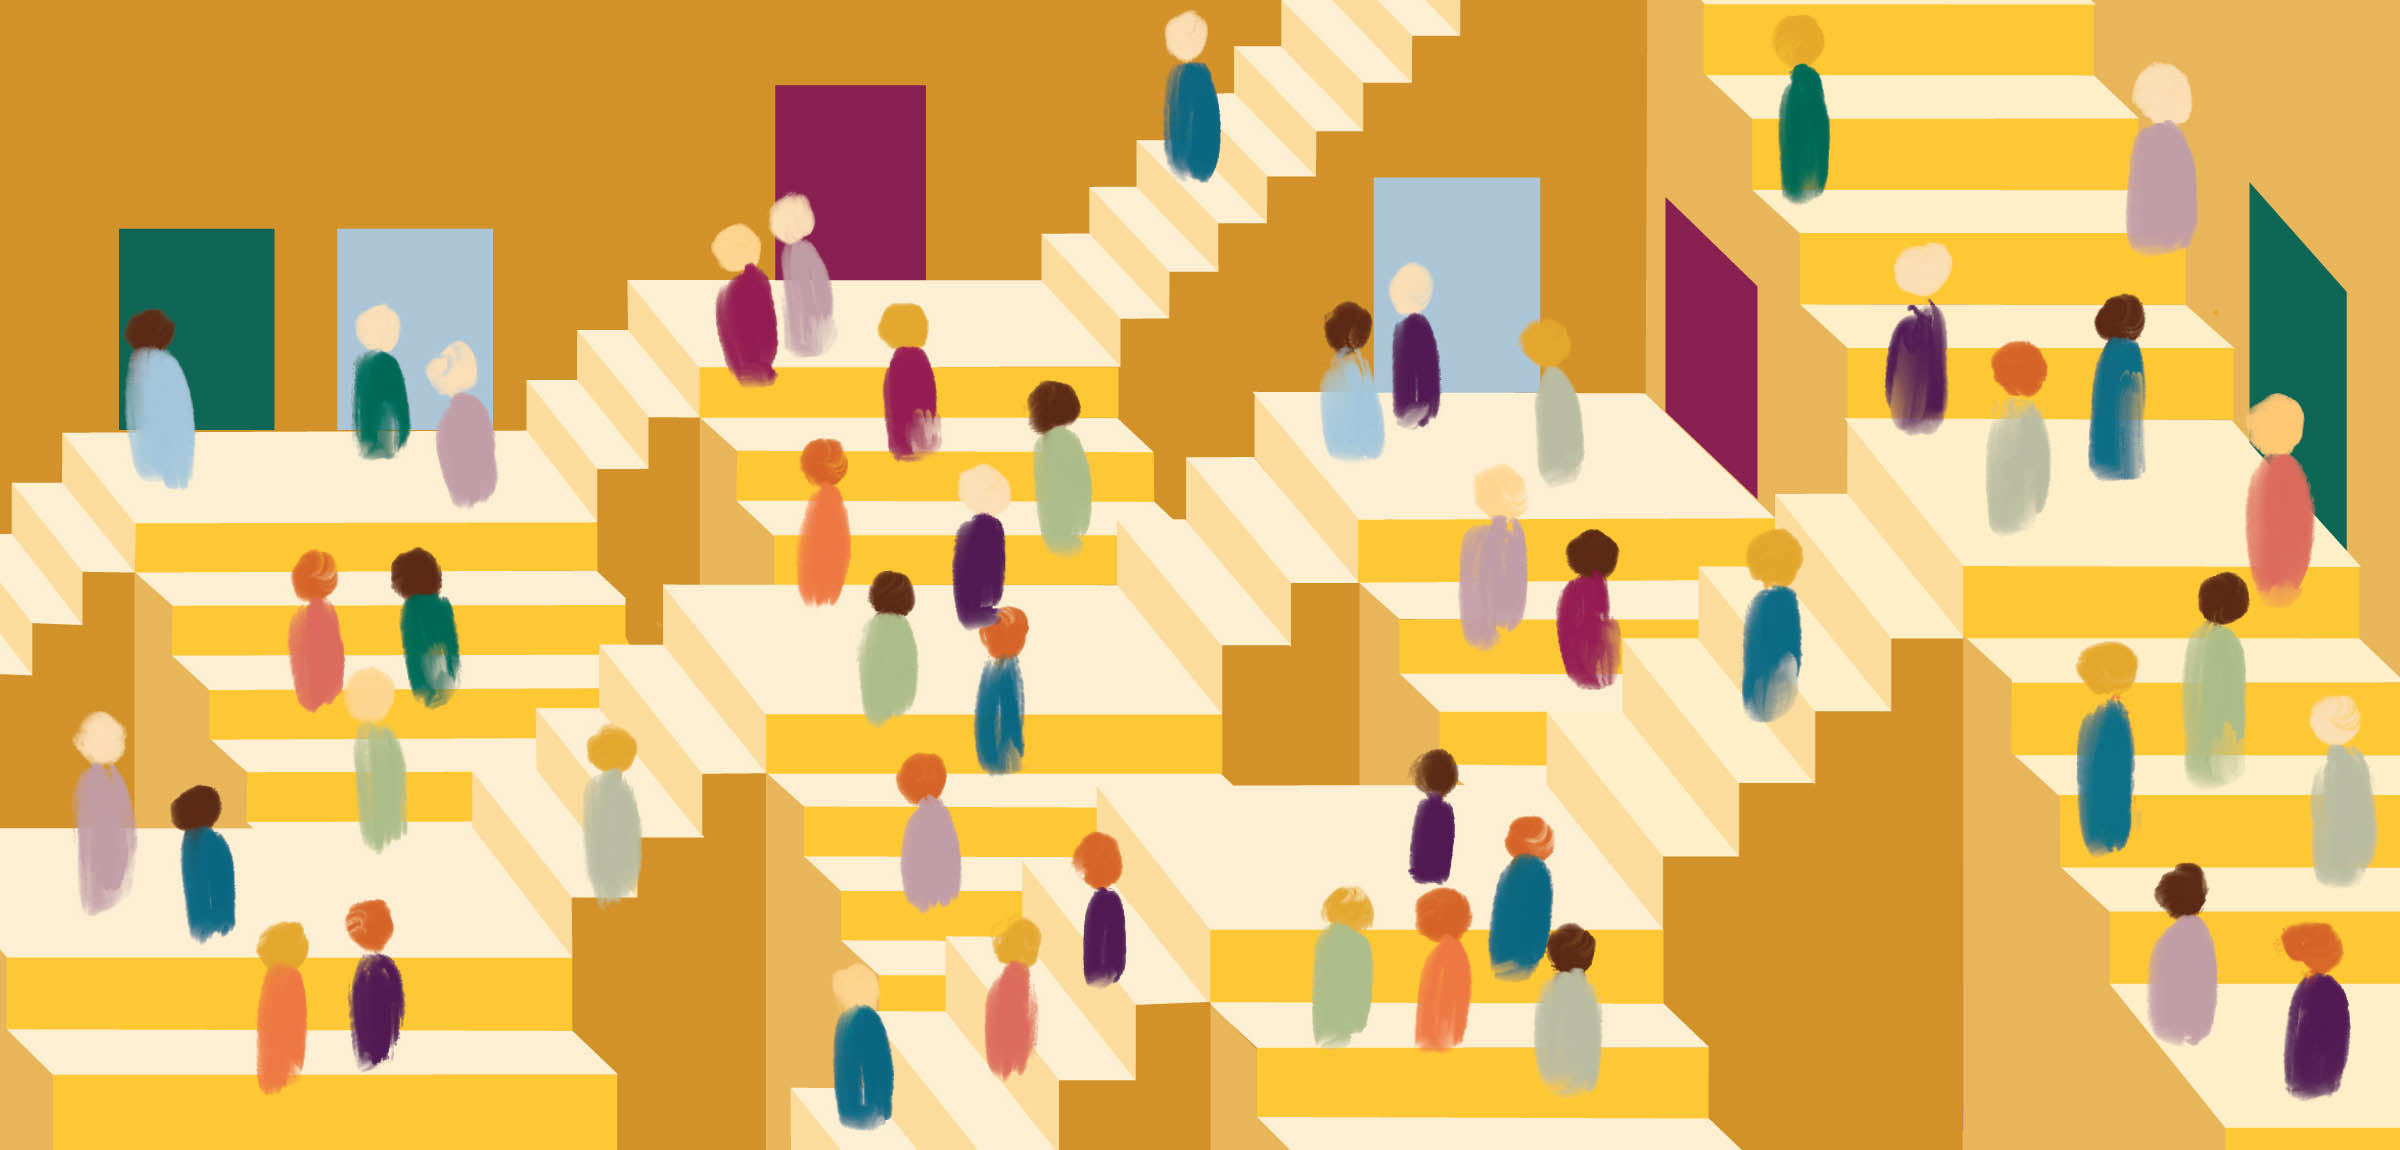 Numerous people ascending and descending a maze of stairs